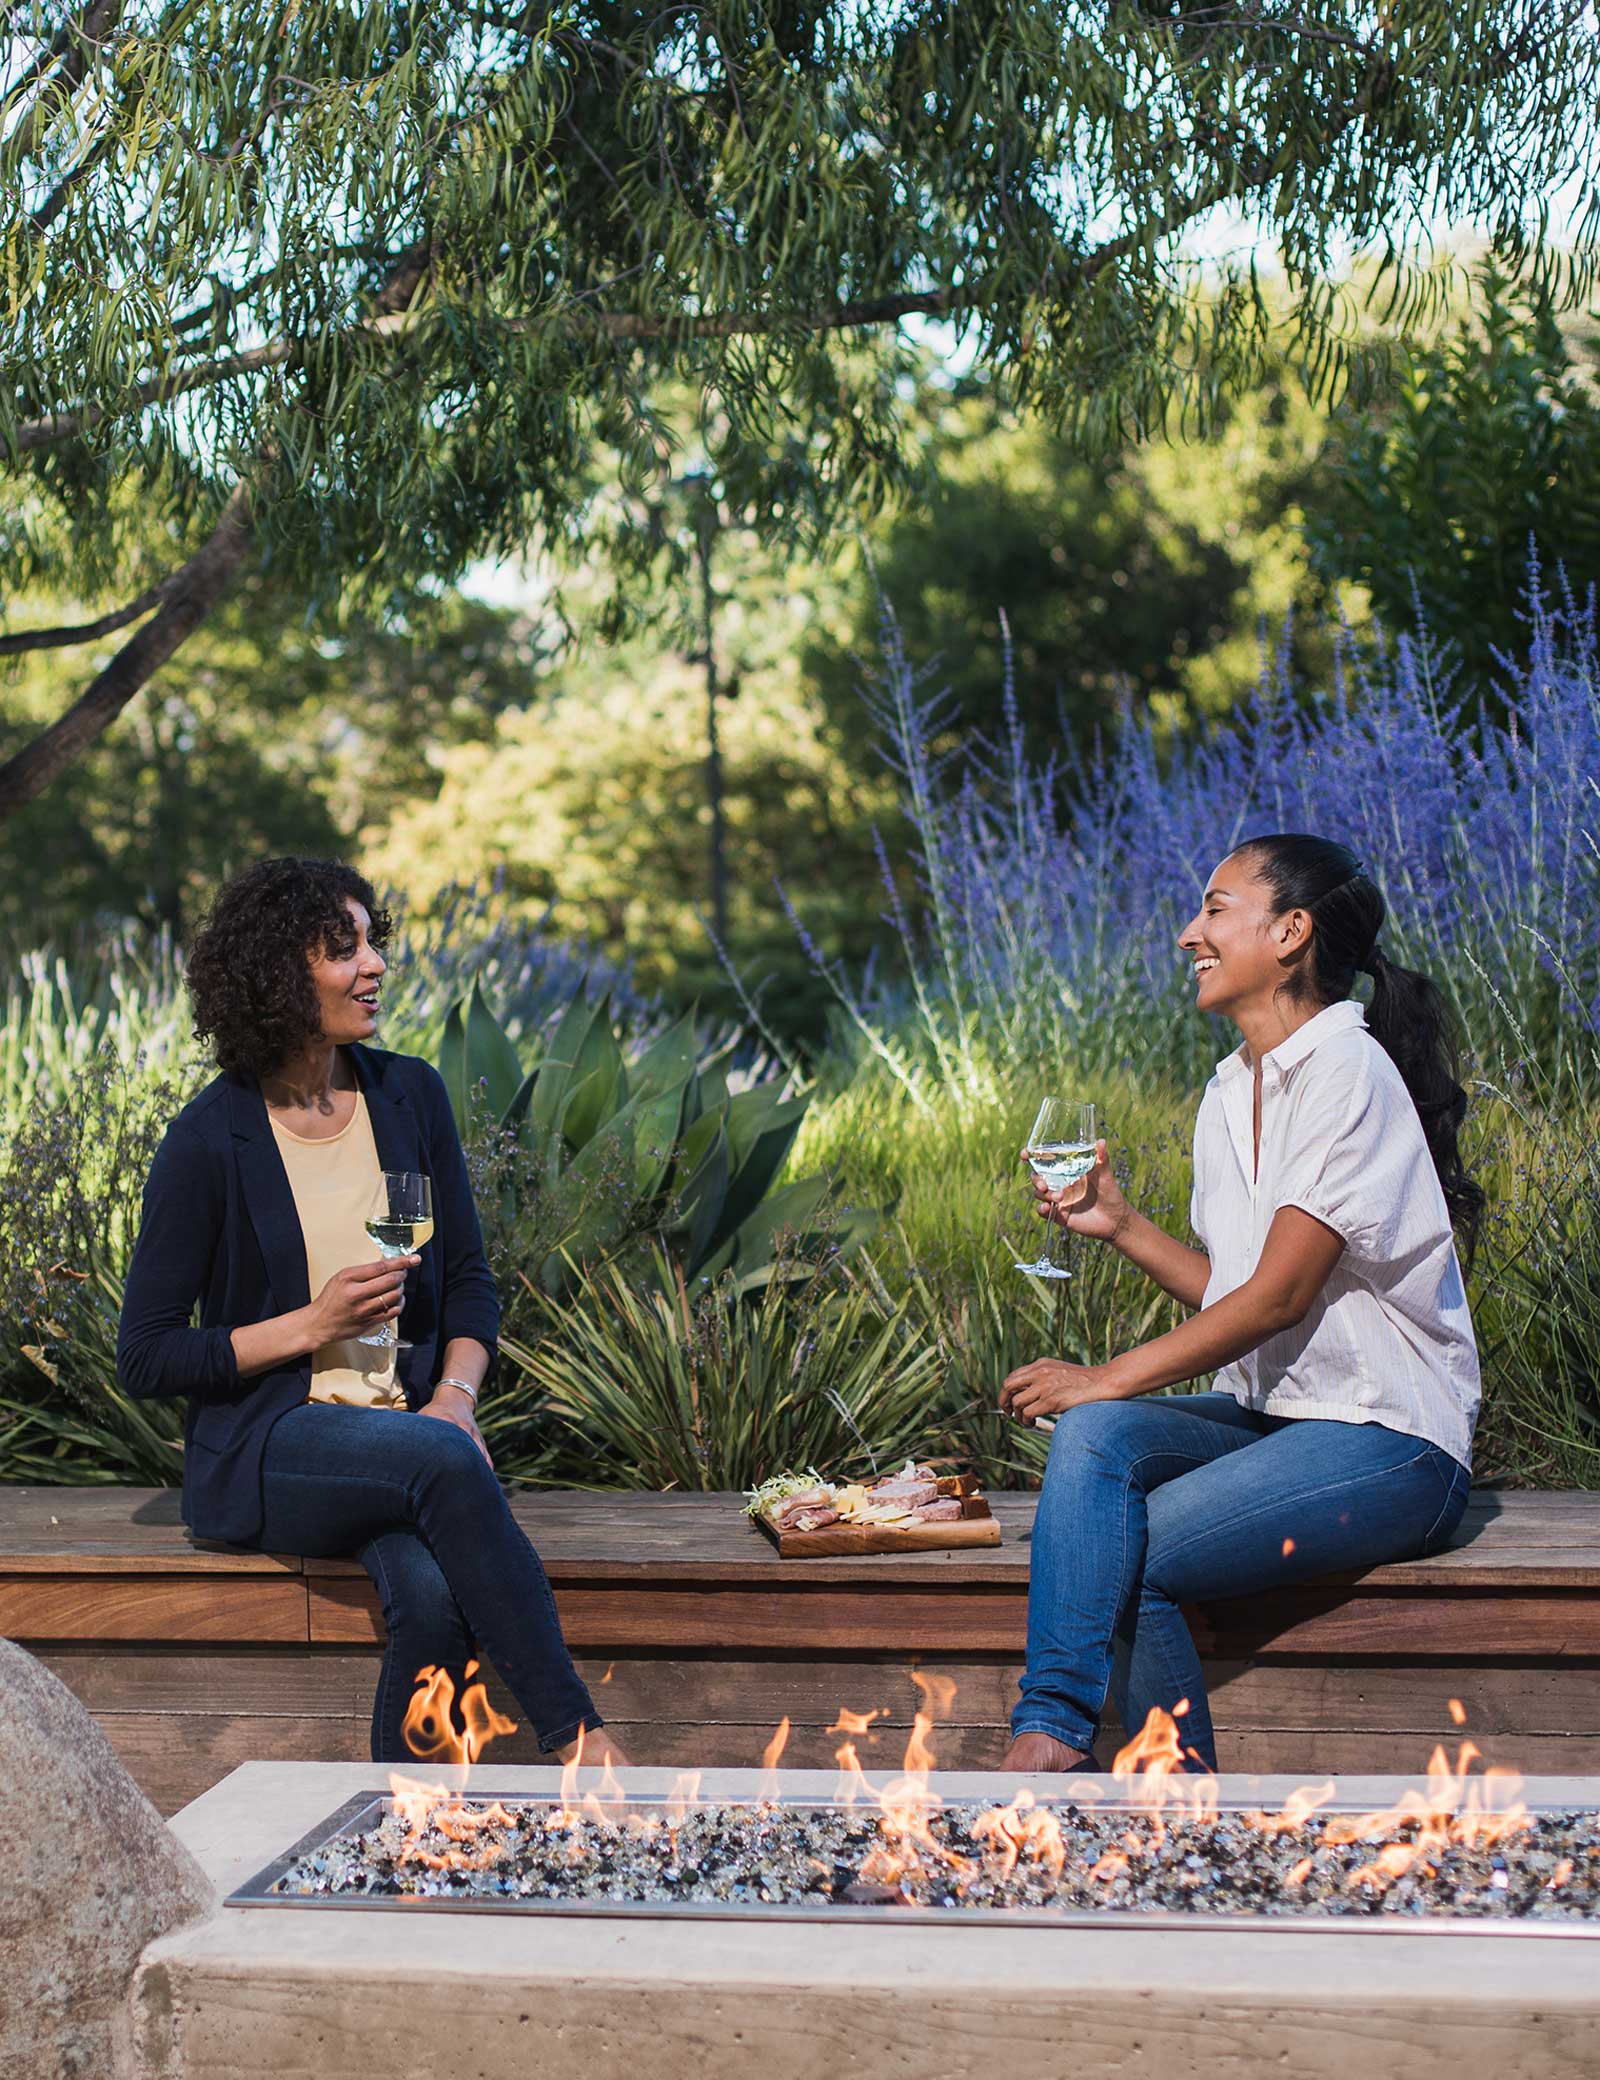 Two women share glasses of wine together on a courtyard bench